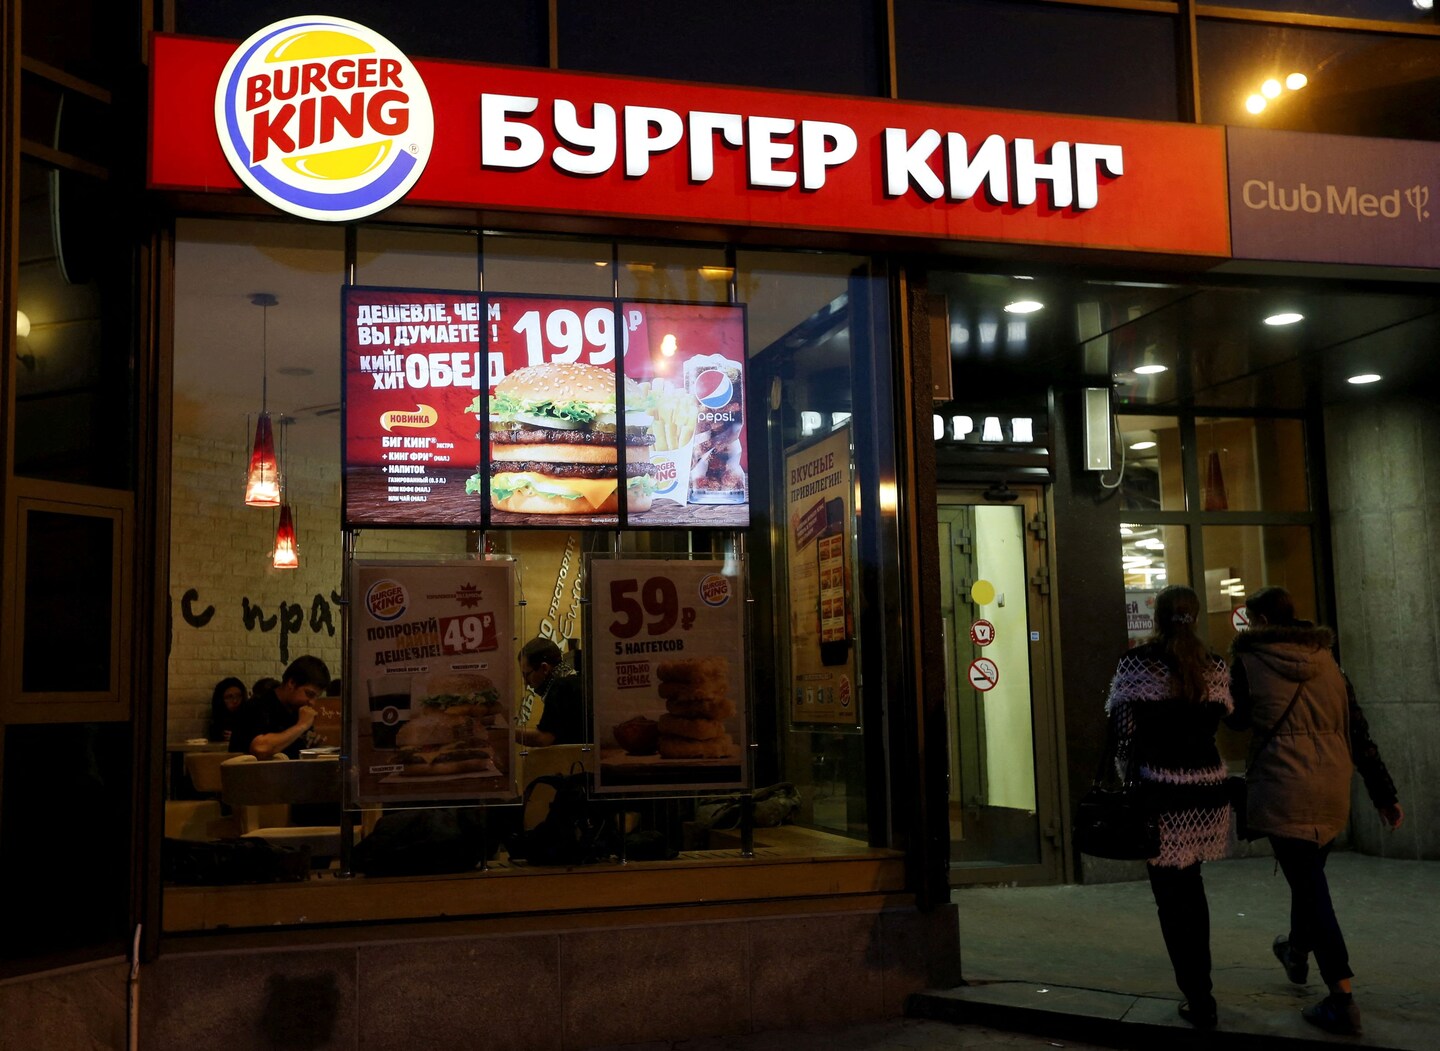 Burger King says the Russian company "refused" to close hundreds of restaurants